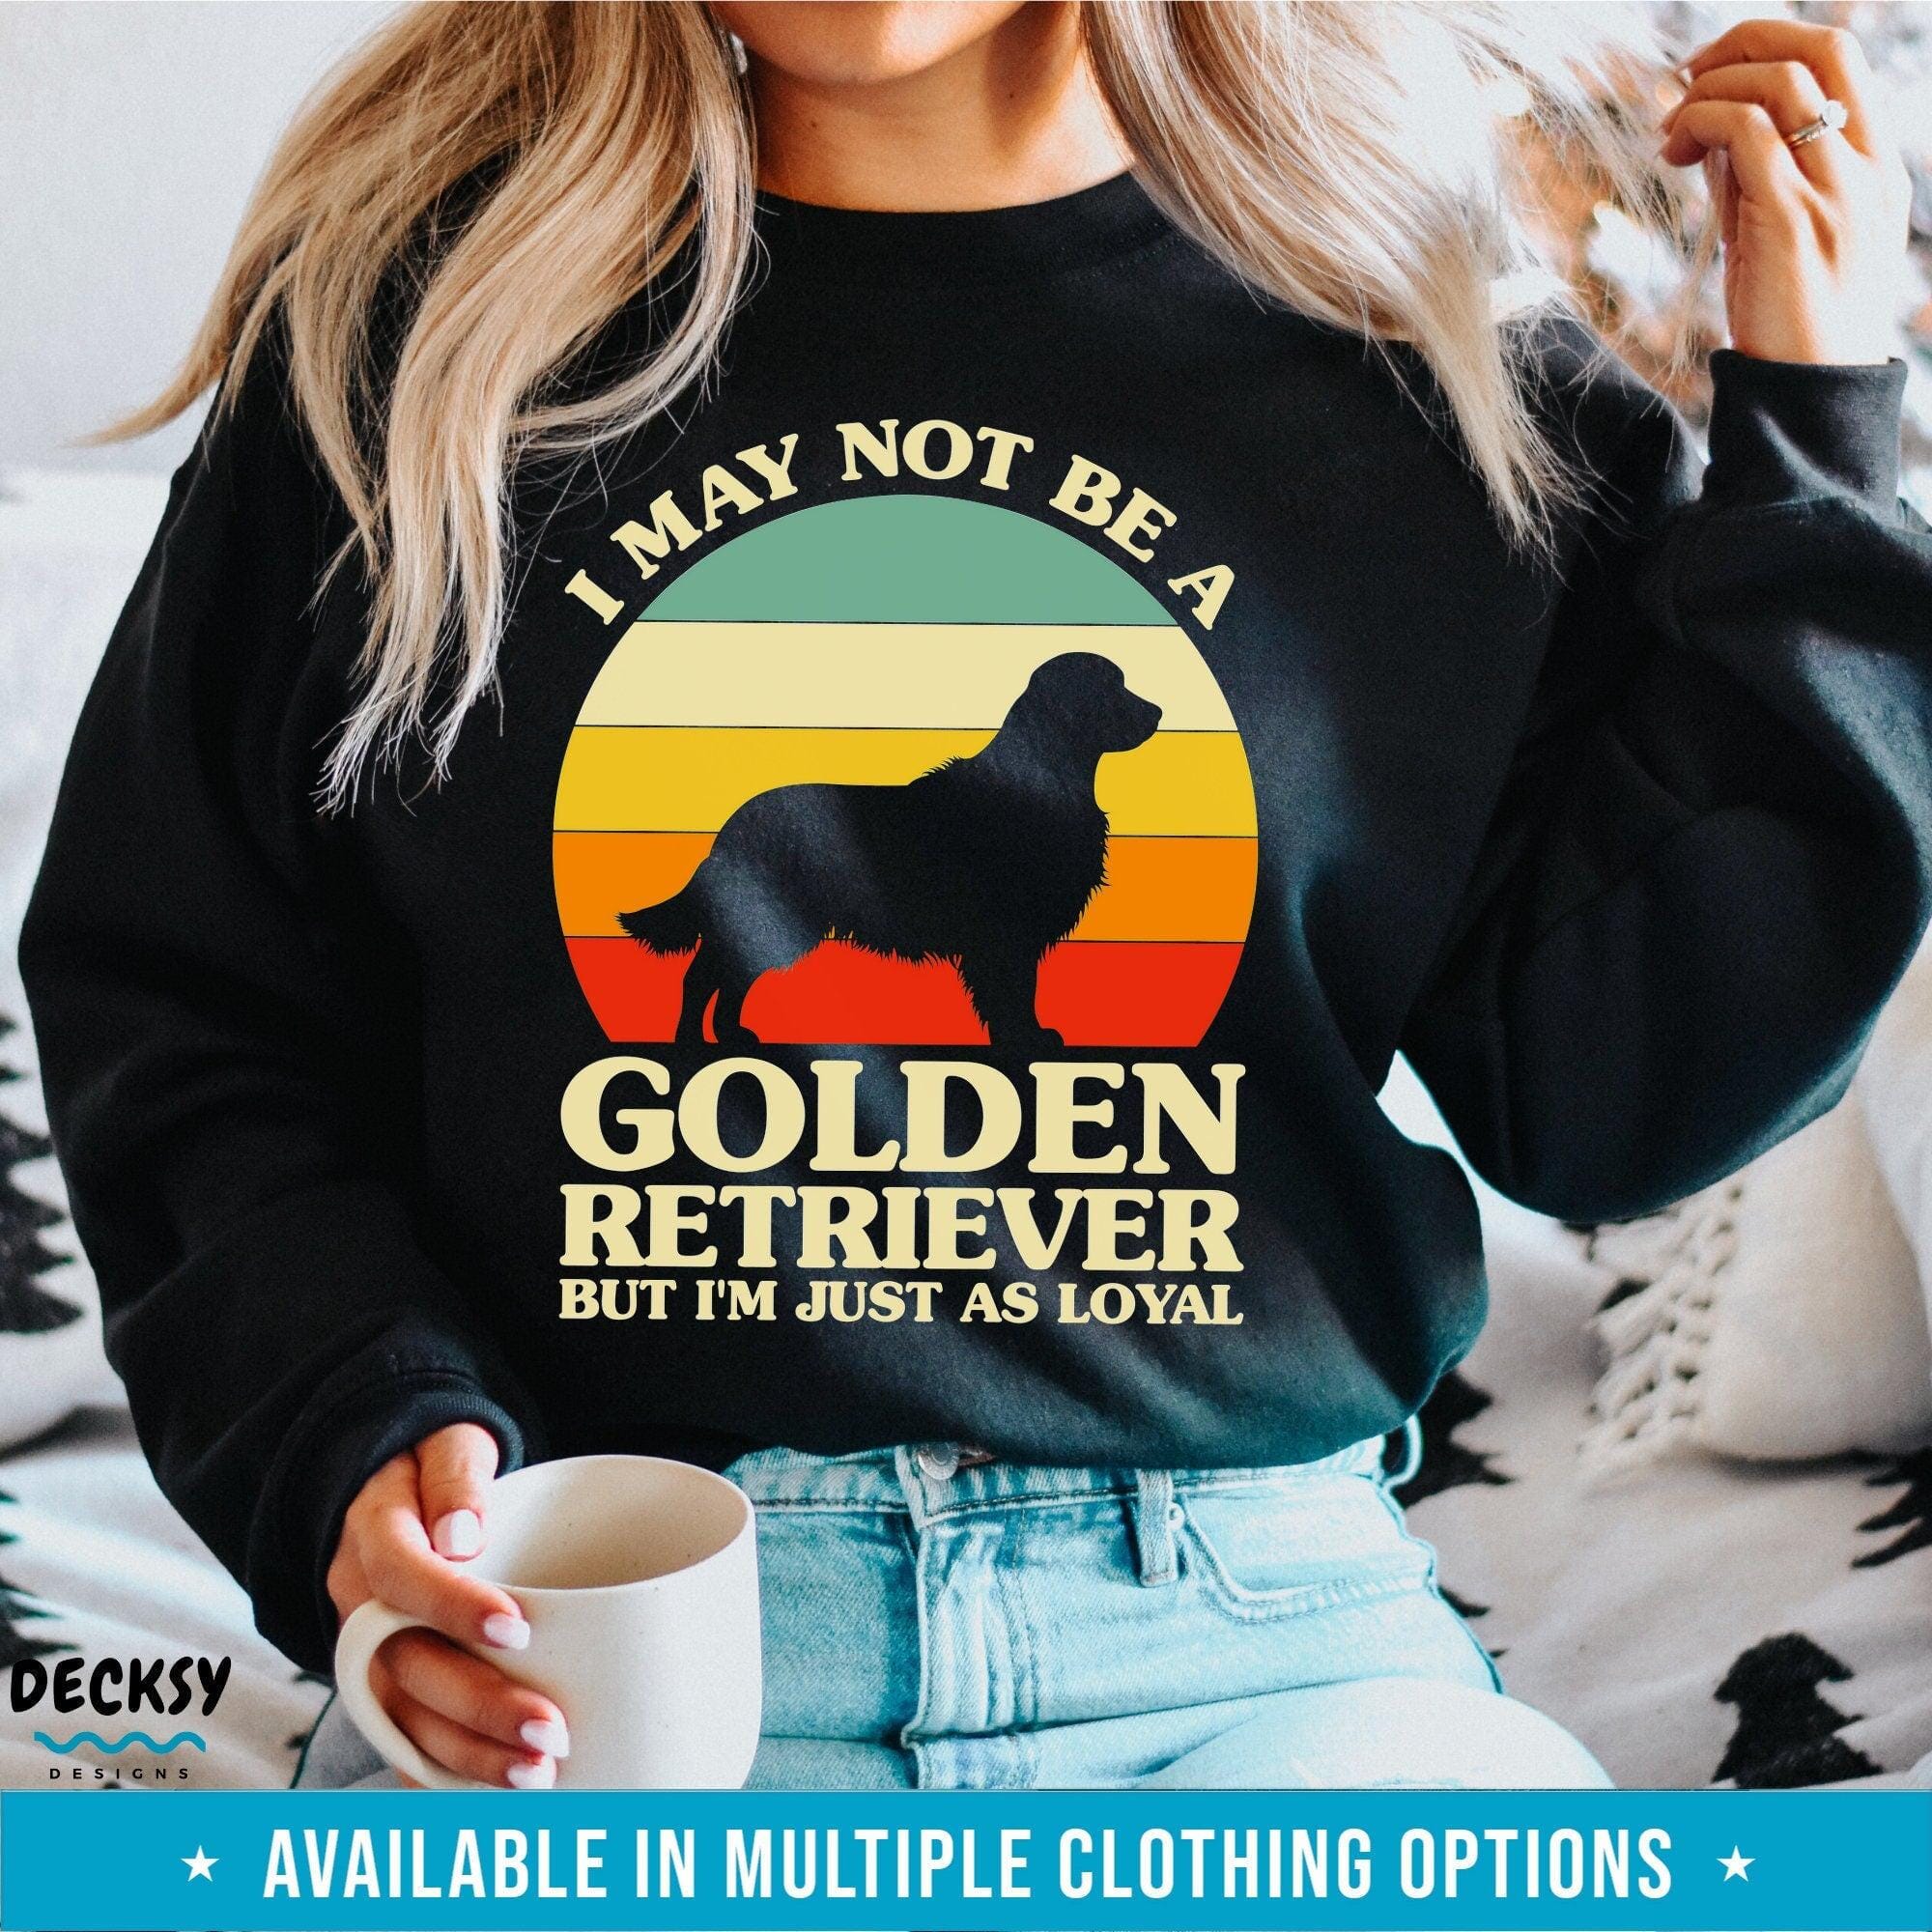 Golden Retriever Sweatshirt, Dog Lover Gift-Clothing:Gender-Neutral Adult Clothing:Tops & Tees:T-shirts:Graphic Tees-DecksyDesigns